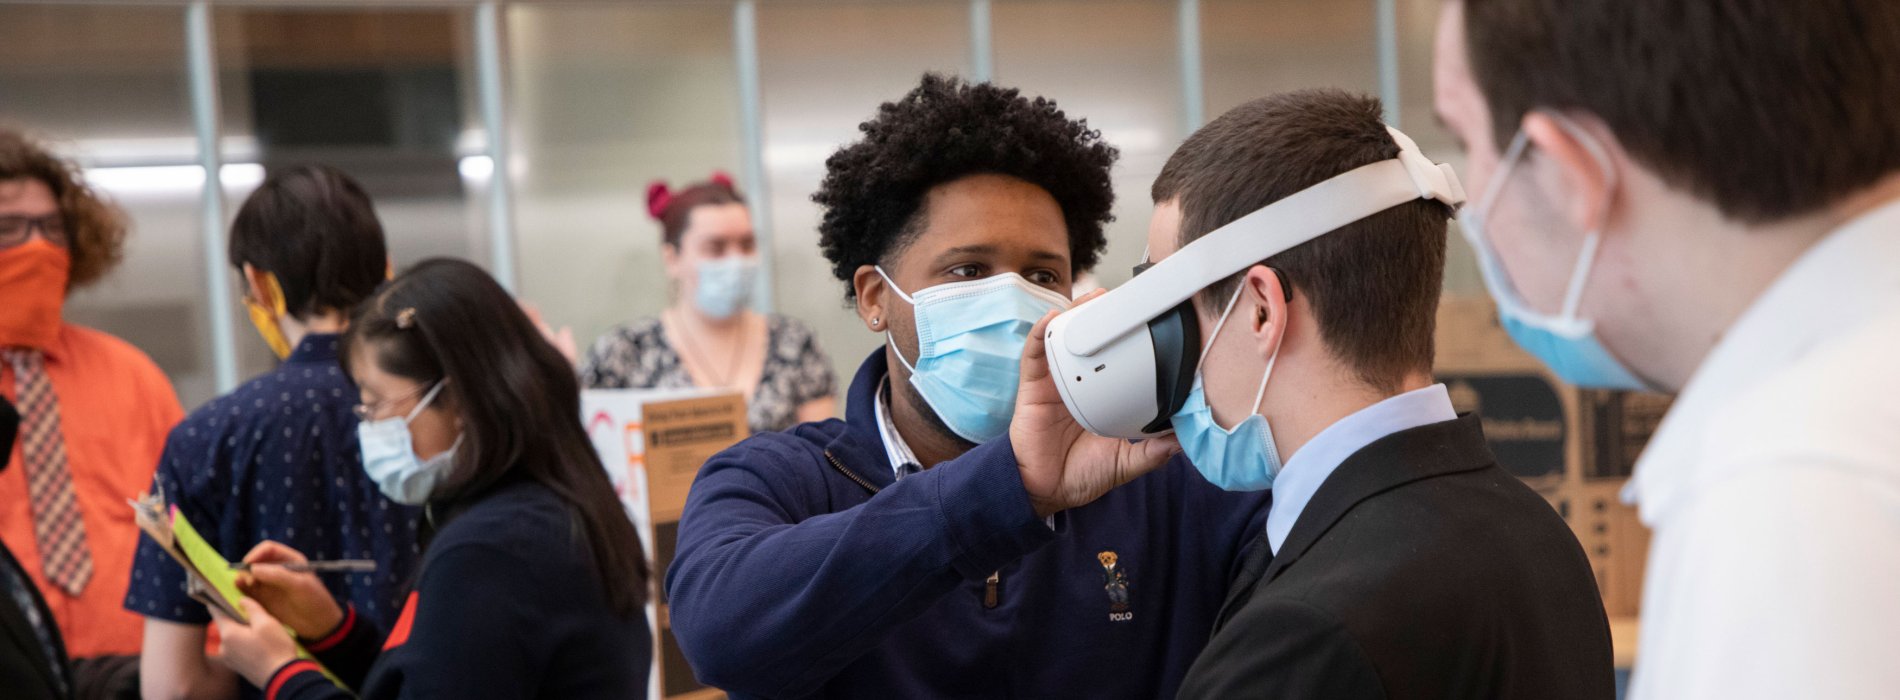 A student helps another person put on a virtual reality head seat during a poster session presentation.